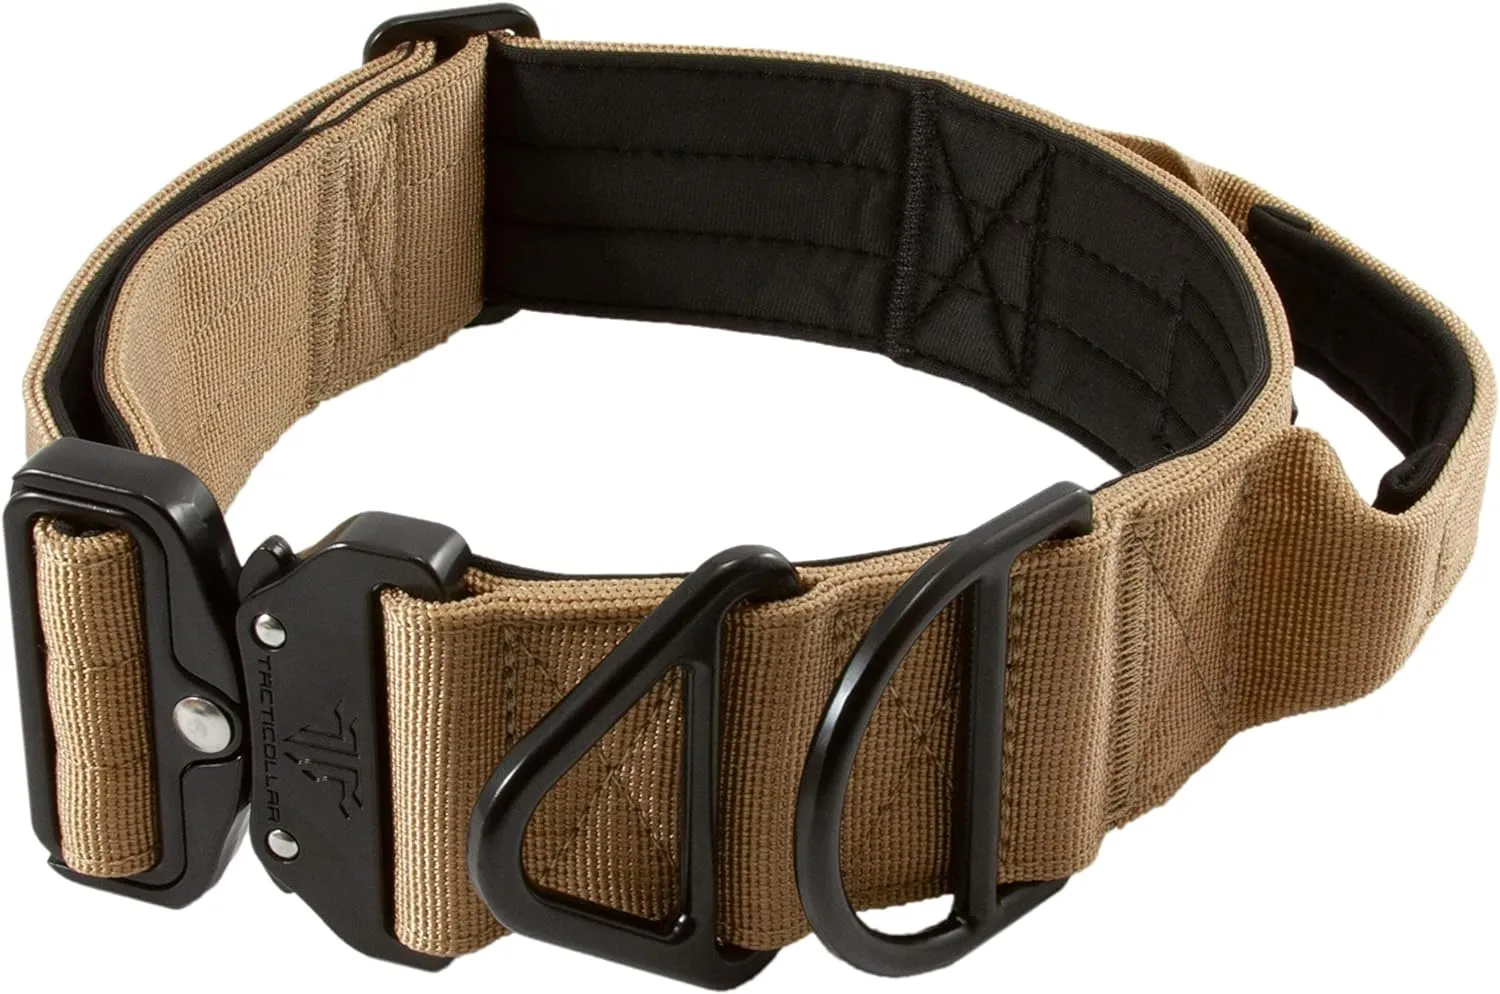 Tacticollar - 2 inch Tactical Dog Collar with Handle